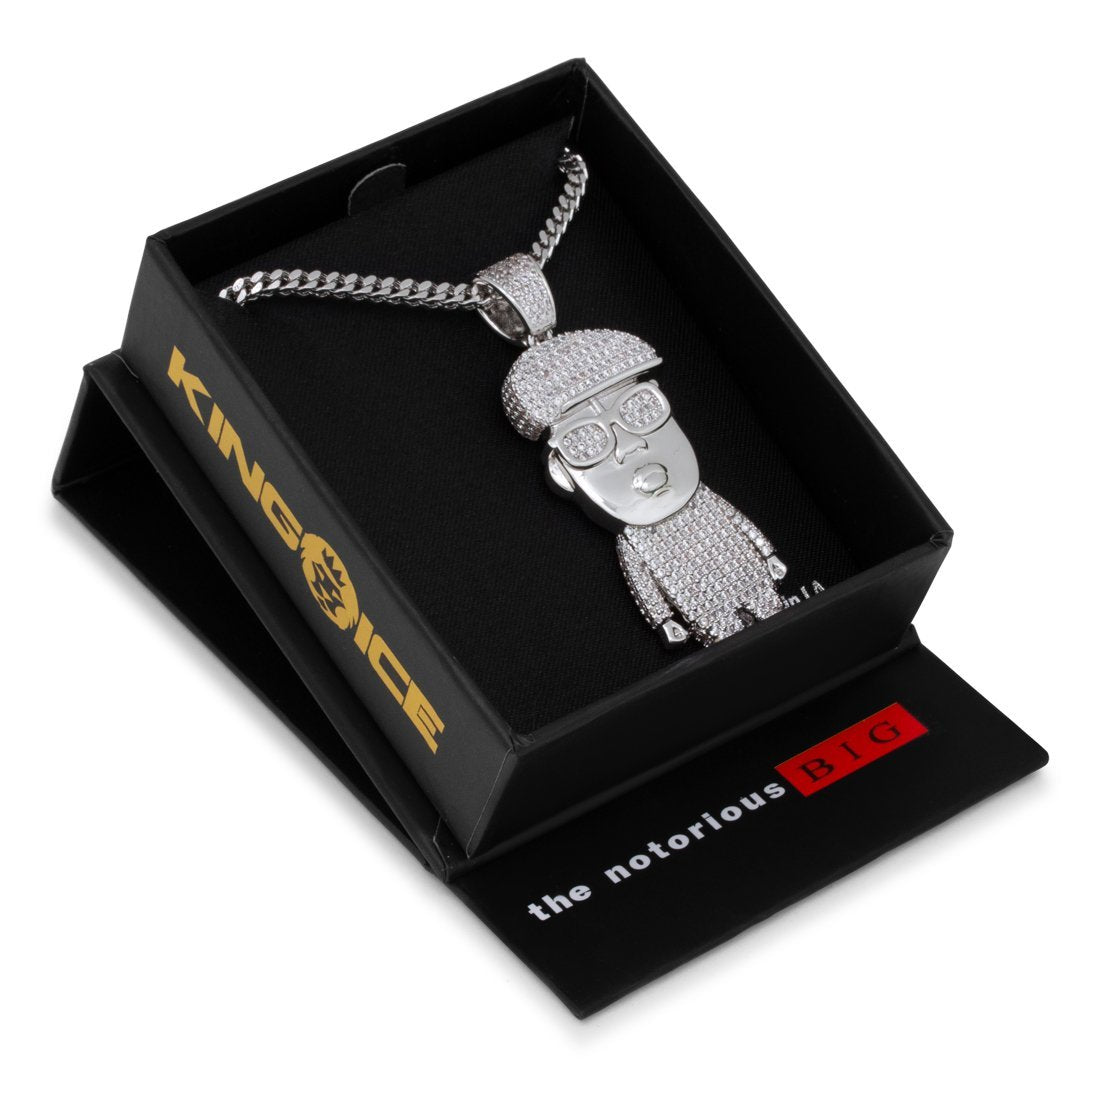 Notorious B.I.G. x King Ice - Biggie Sweater Necklace